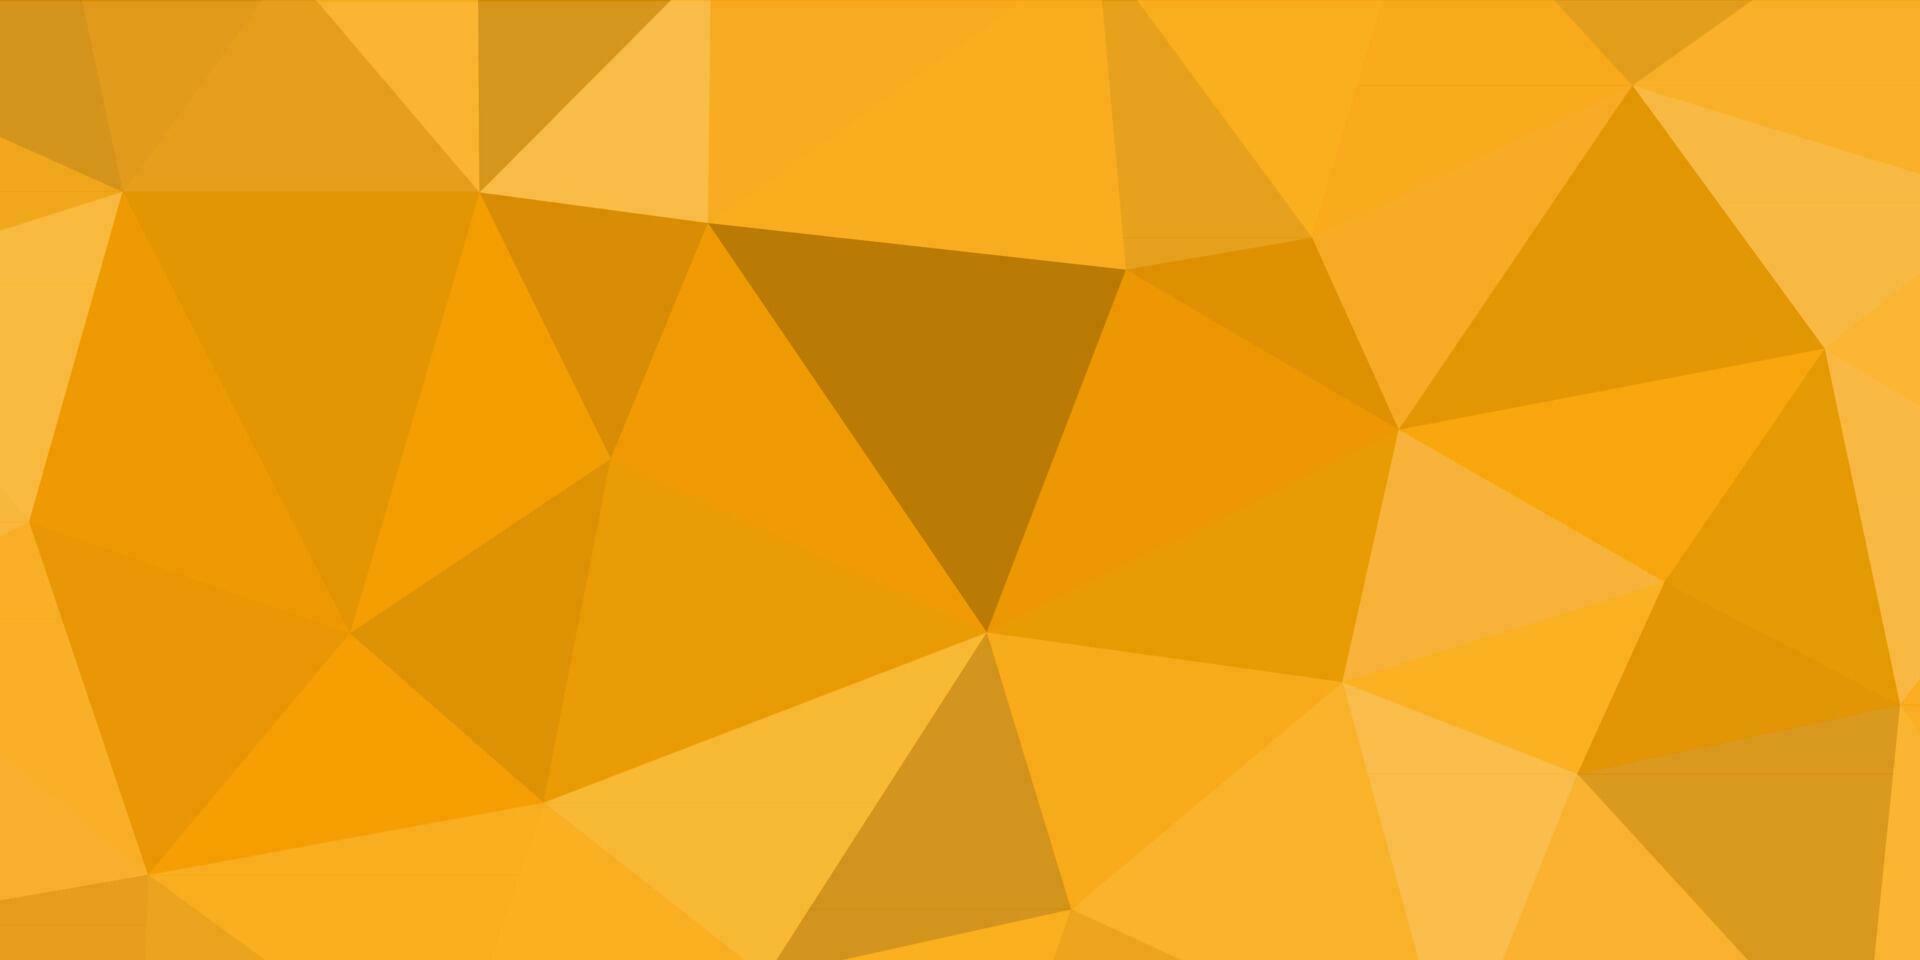 abstract gamboge yellow geometric background with triangles vector